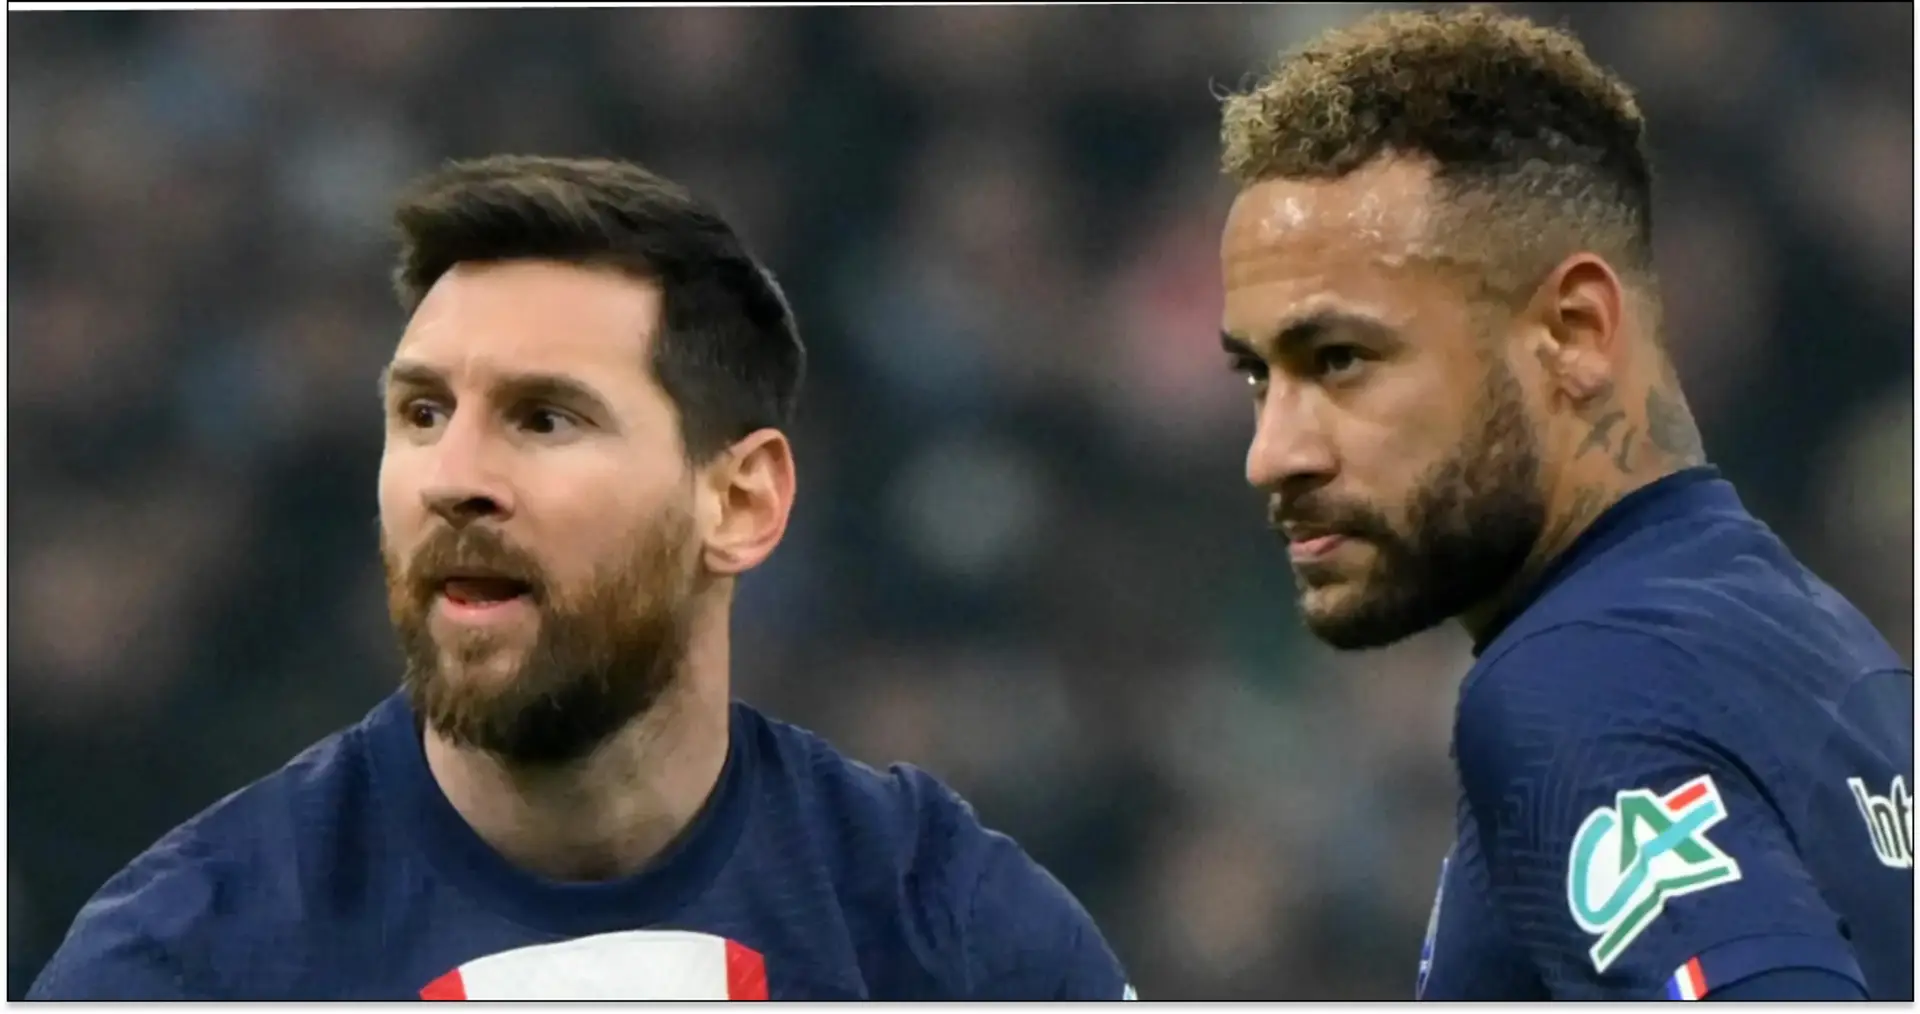 'It didn't turn out as we thought it would': Neymar sends message to Messi after PSG exit, Leo replies